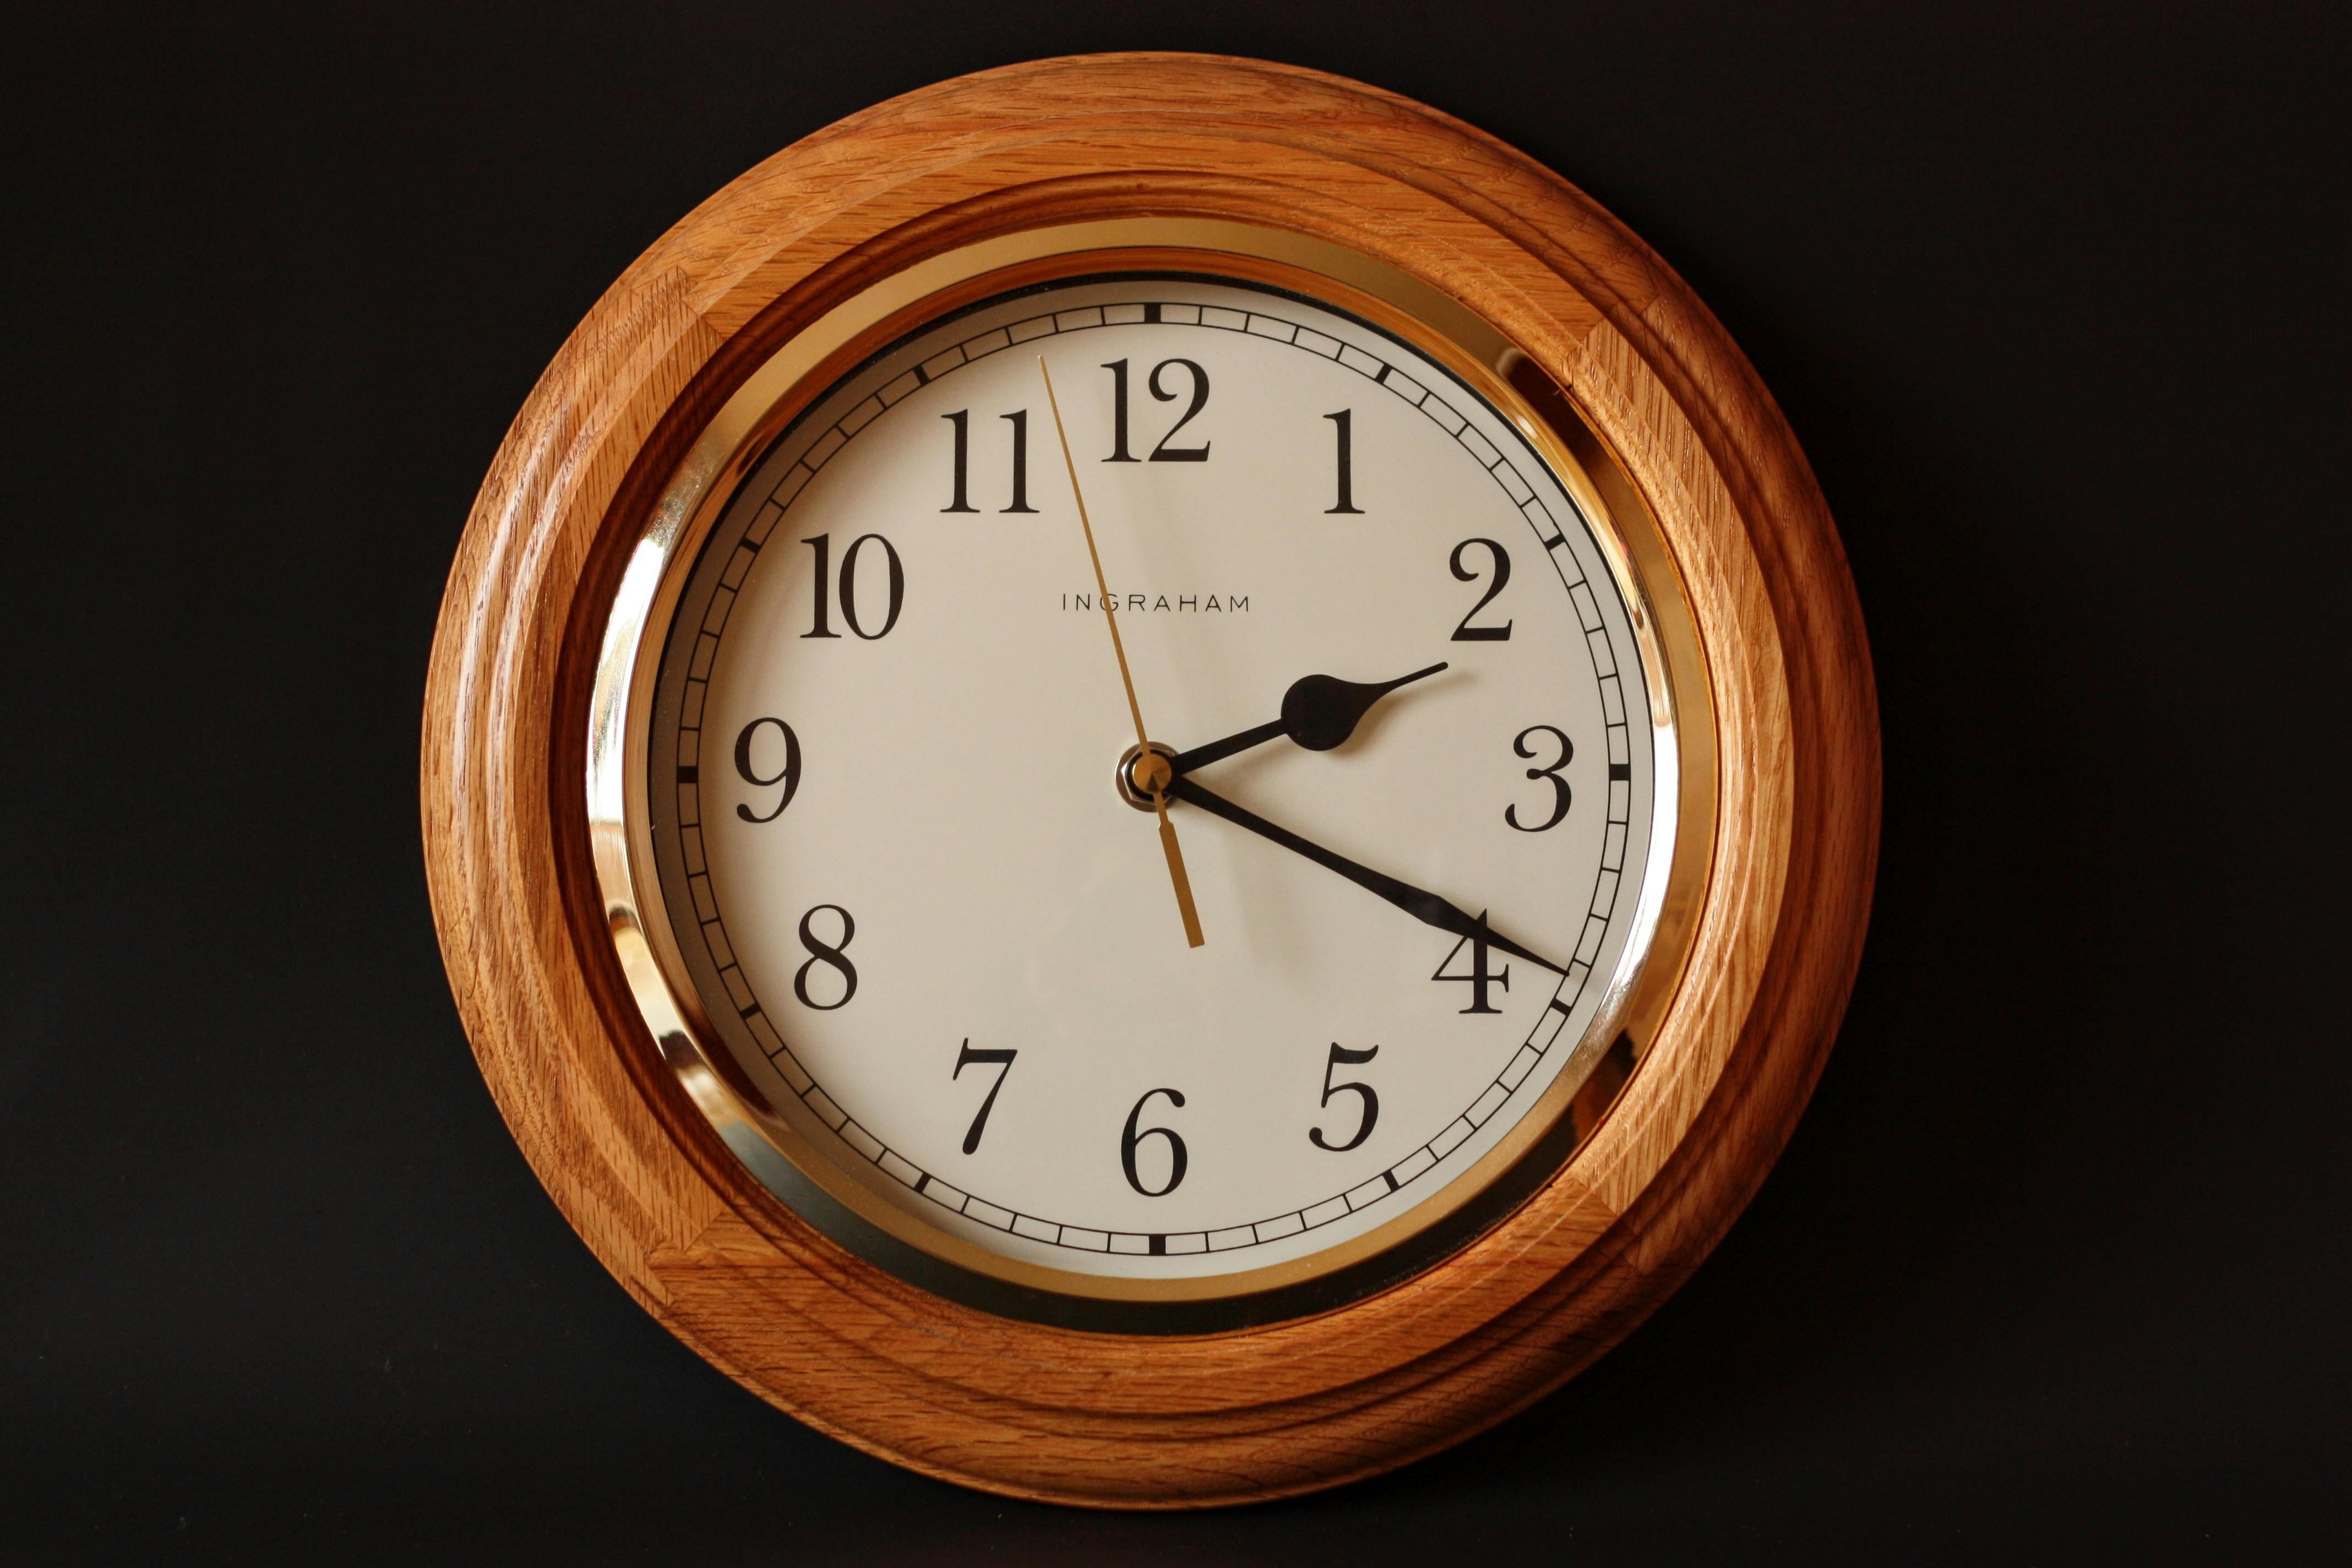 Brown Wooden Framed Clock Showing 2:19 \u00b7 Free Stock Photo